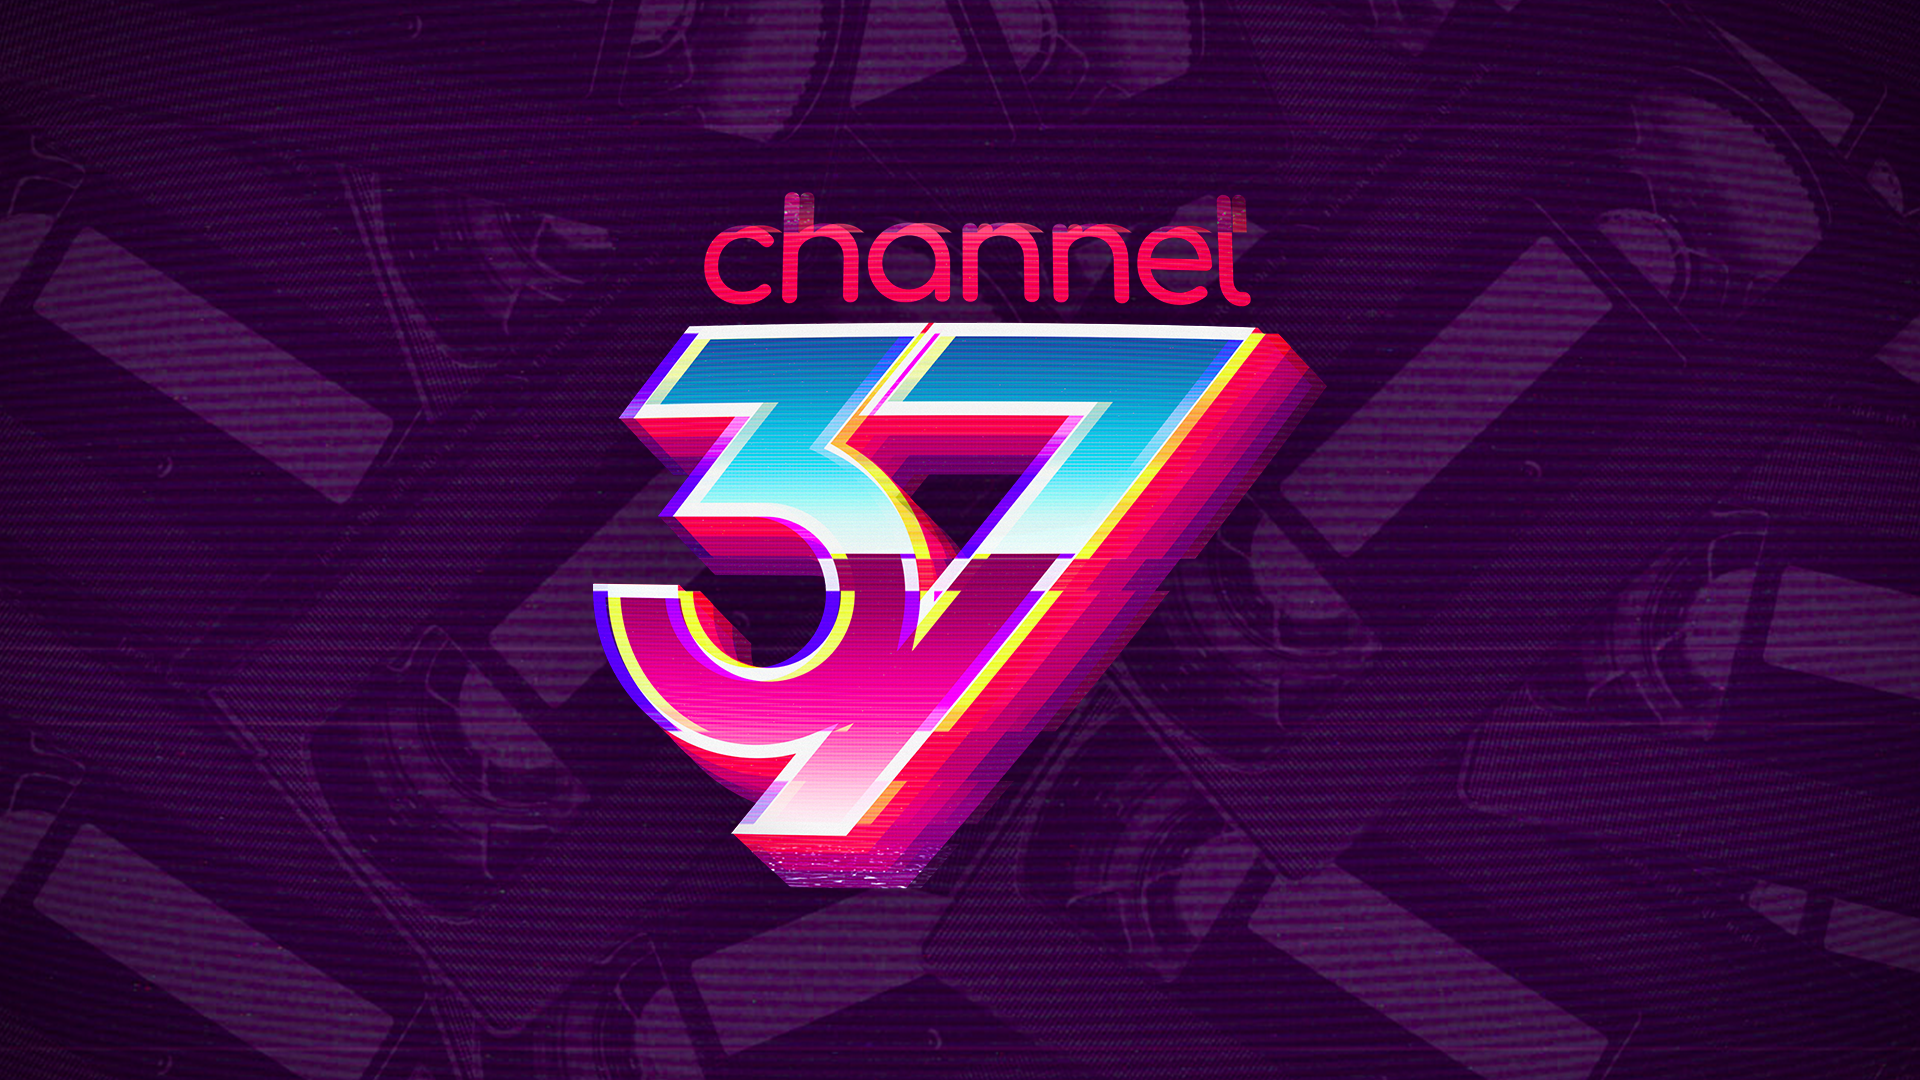 Channel 37 is Local TV Nostalgia from the Age of Beta & VHS